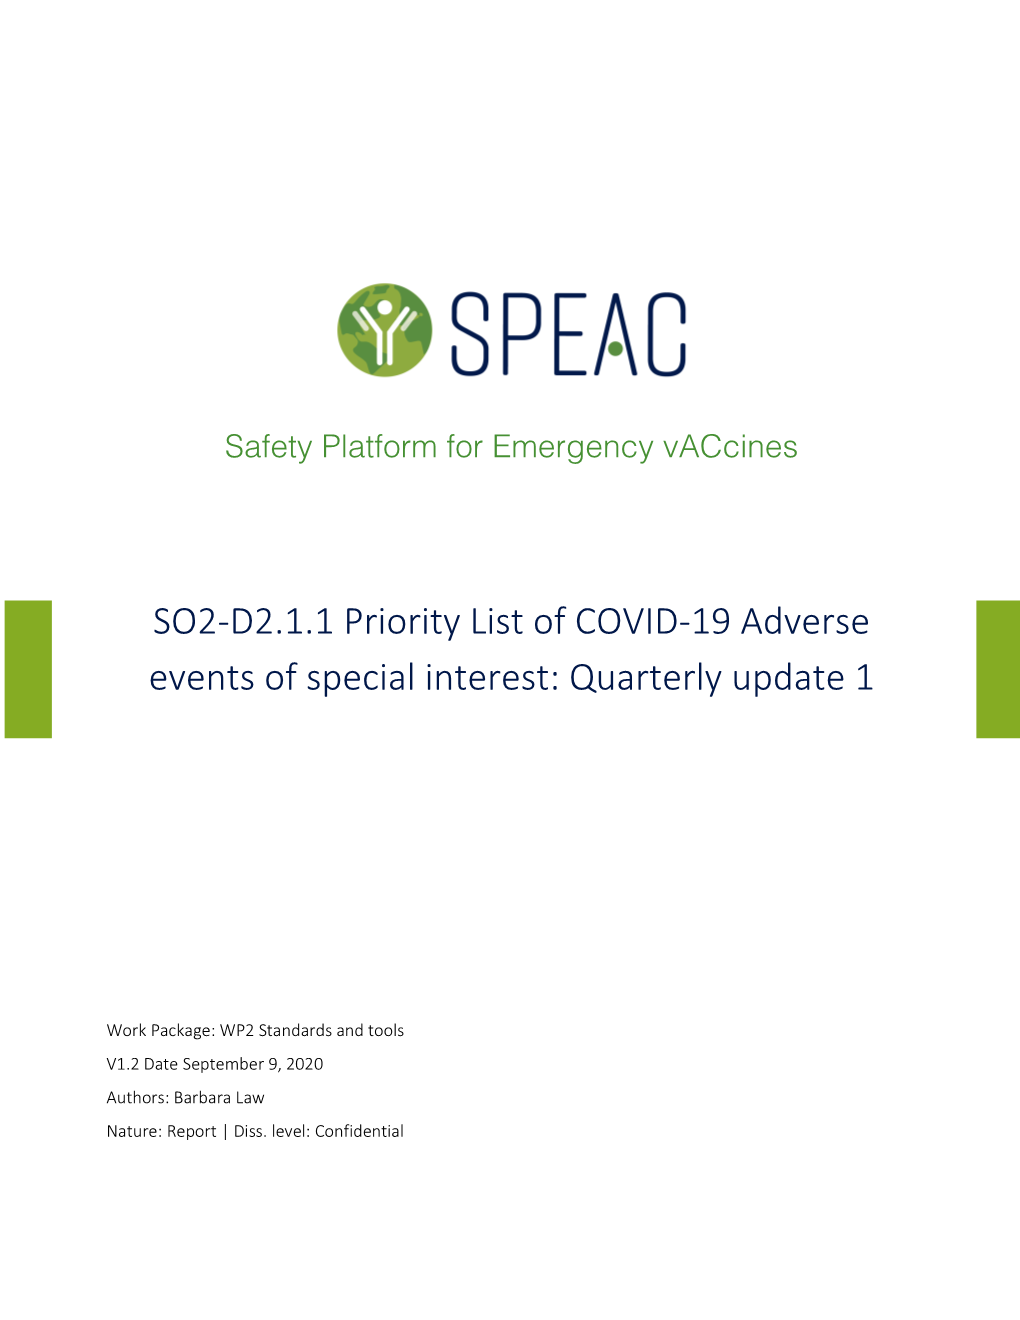 SO2-D2.1.1 Priority List of COVID-19 Adverse Events of Special Interest: Quarterly Update 1